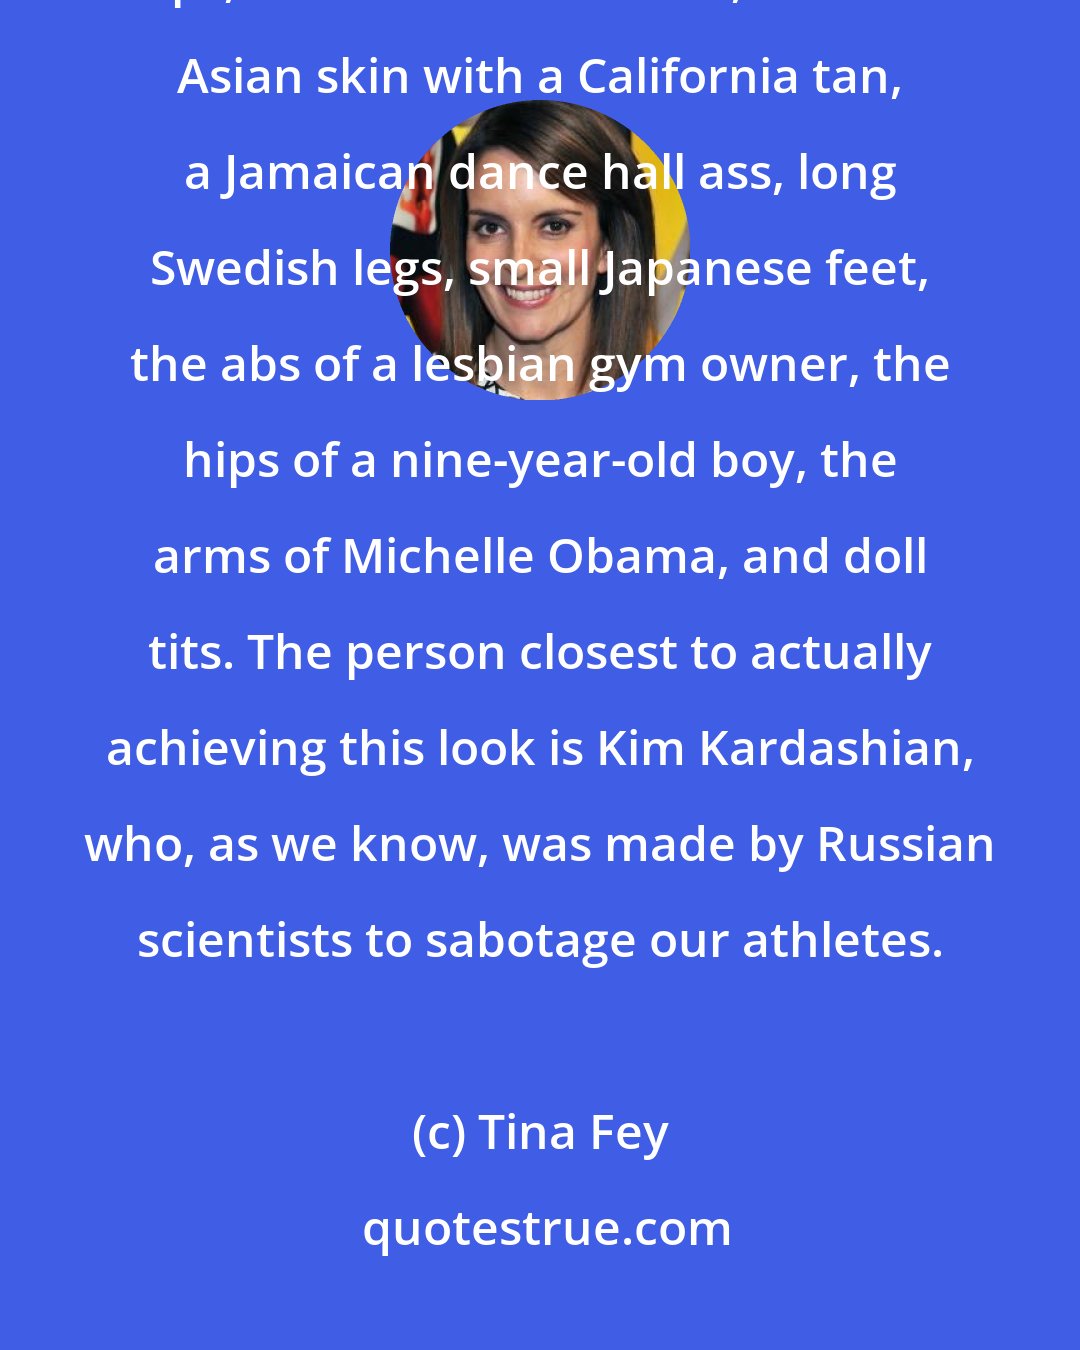 Tina Fey: Now every girl is expected to have: Caucasian blue eyes, full Spanish lips, a classic button nose, hairless Asian skin with a California tan, a Jamaican dance hall ass, long Swedish legs, small Japanese feet, the abs of a lesbian gym owner, the hips of a nine-year-old boy, the arms of Michelle Obama, and doll tits. The person closest to actually achieving this look is Kim Kardashian, who, as we know, was made by Russian scientists to sabotage our athletes.